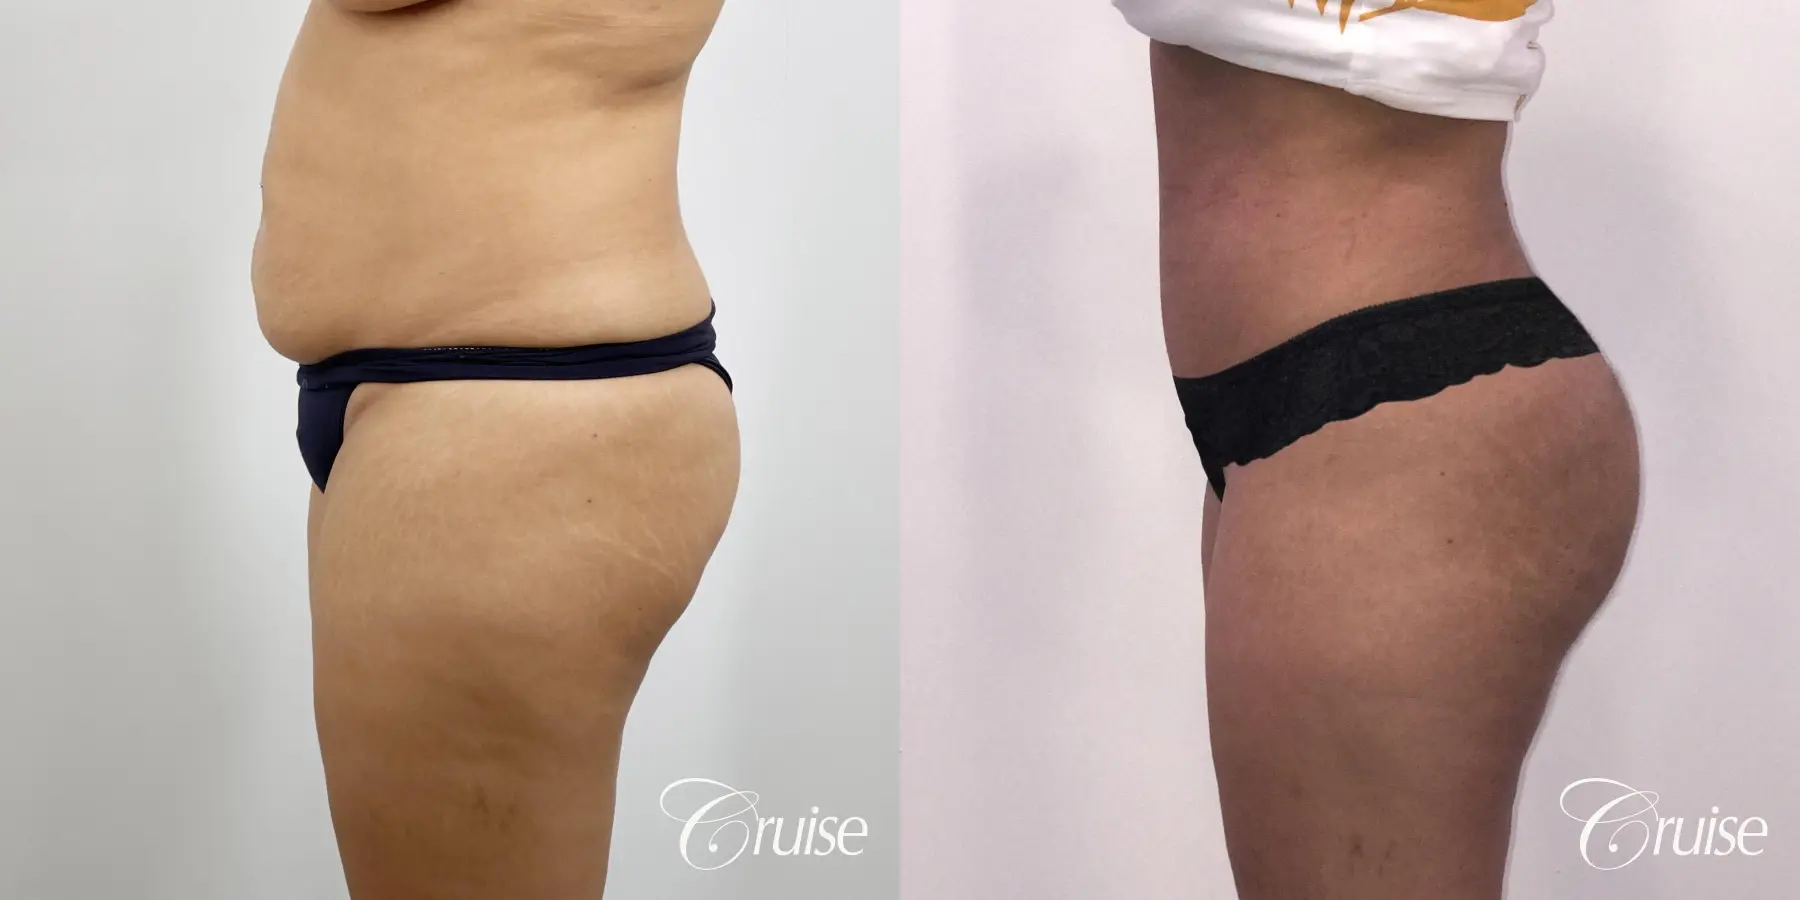 Liposuction - Before and After 2